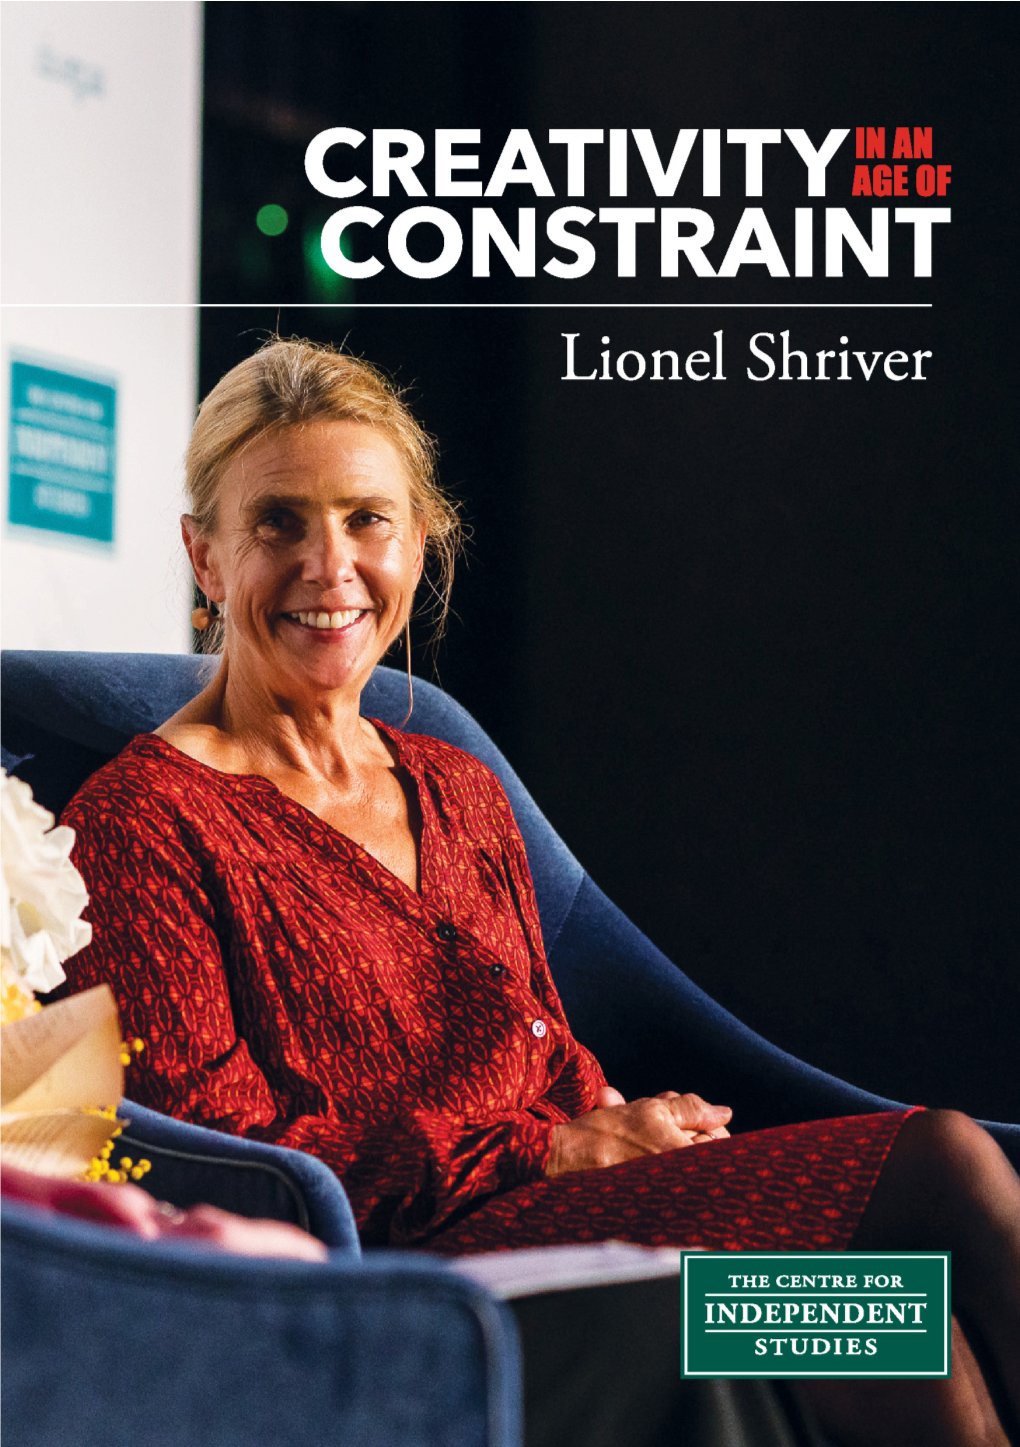 CREATIVITY in an AGE of CONSTRAINT by Lionel Shriver